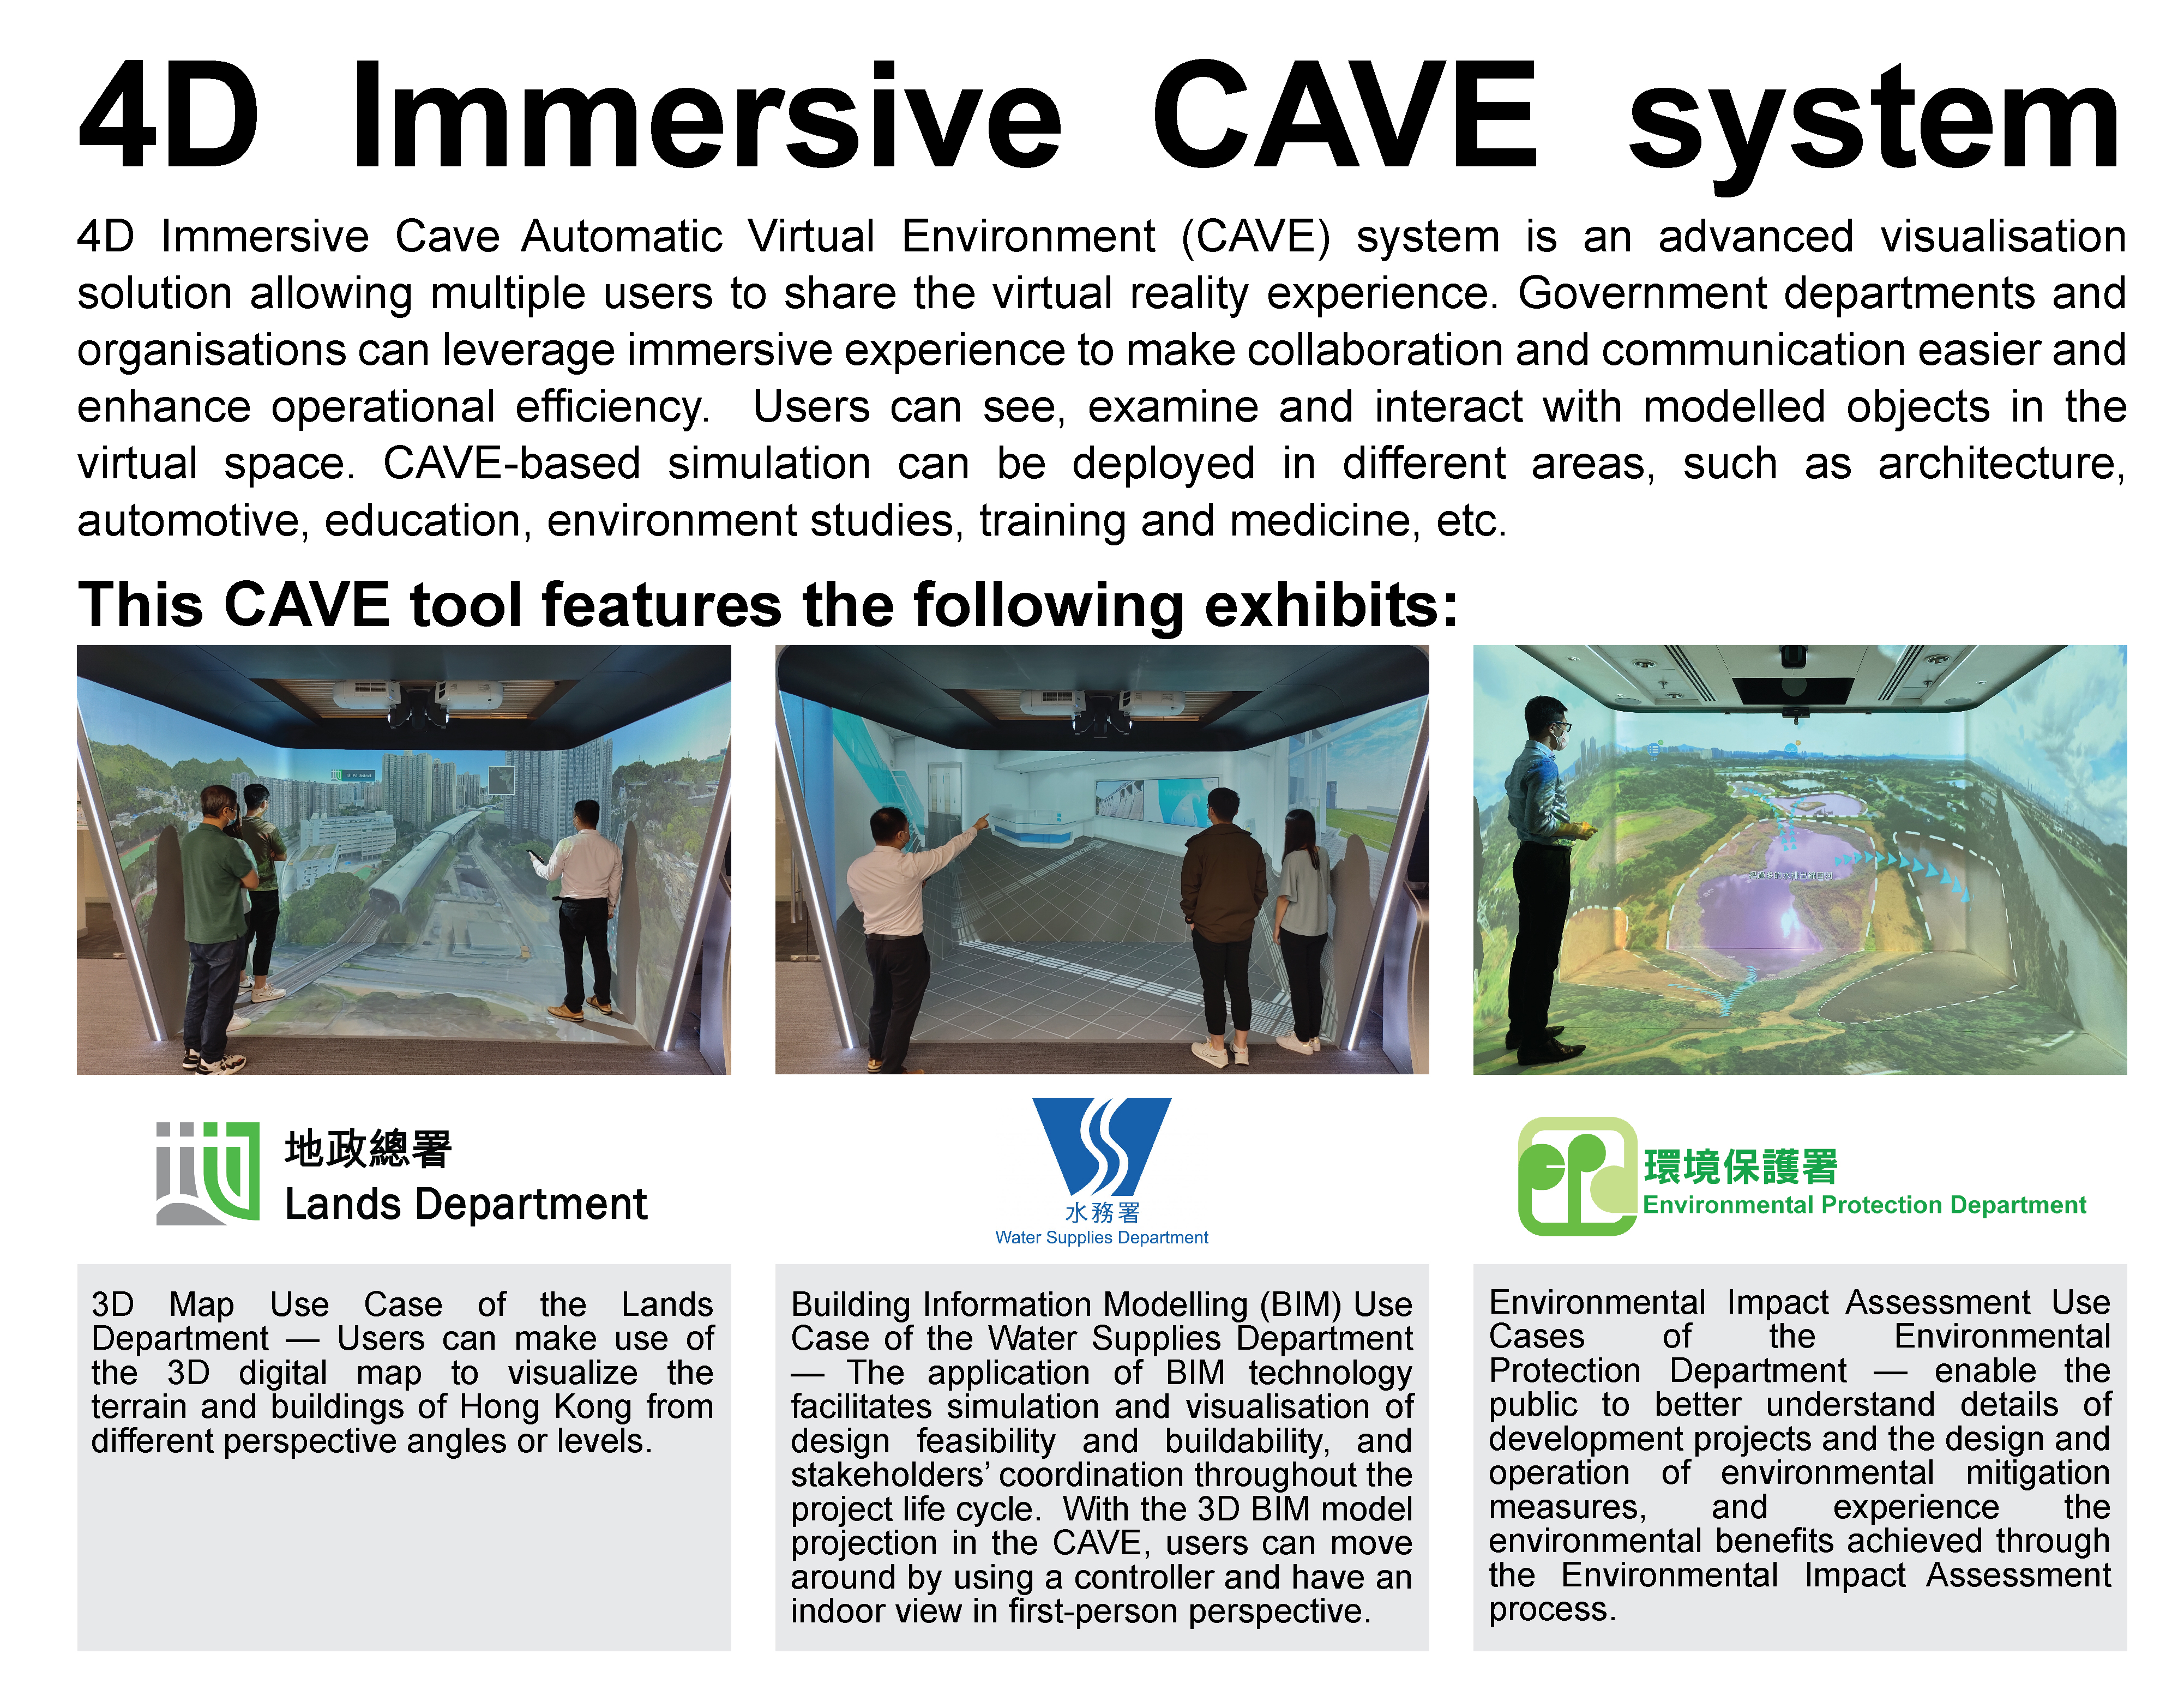 4D Immersive CAVE system,
					4D Immersive Cave Automatic Virtual Environment (CAVE) system is an advanced visualisation solution allowing multiple users to share the virtual reality experience. Government departments and organisations can leverage immersive experience to make collaboration and communication easier and enhance operational efficiency.  Users can see, examine and interact with modelled objects in the virtual space. CAVE-based simulation can be deployed in different areas, such as architecture, automotive, education, environment studies, training and medicine, etc.
					This CAVE tool features the following exhibits:
					3D Map Use Case — gives a 3600 bird's-eye view of districts in Hong Kong. Users can understand Hong Kong's housing conditions, different kinds of IoT information, etc. in a 3D model of existing built-up environment derived from UAV camera system & ground-based digital cameras.
					Building Information Model (BIM) Use Case — gives an indoor view in first-person perspective. Users can move around using a controller and multiple stakeholders can collaborate on the planning, design and construction of a building through projection of the 3D model in the CAVE.